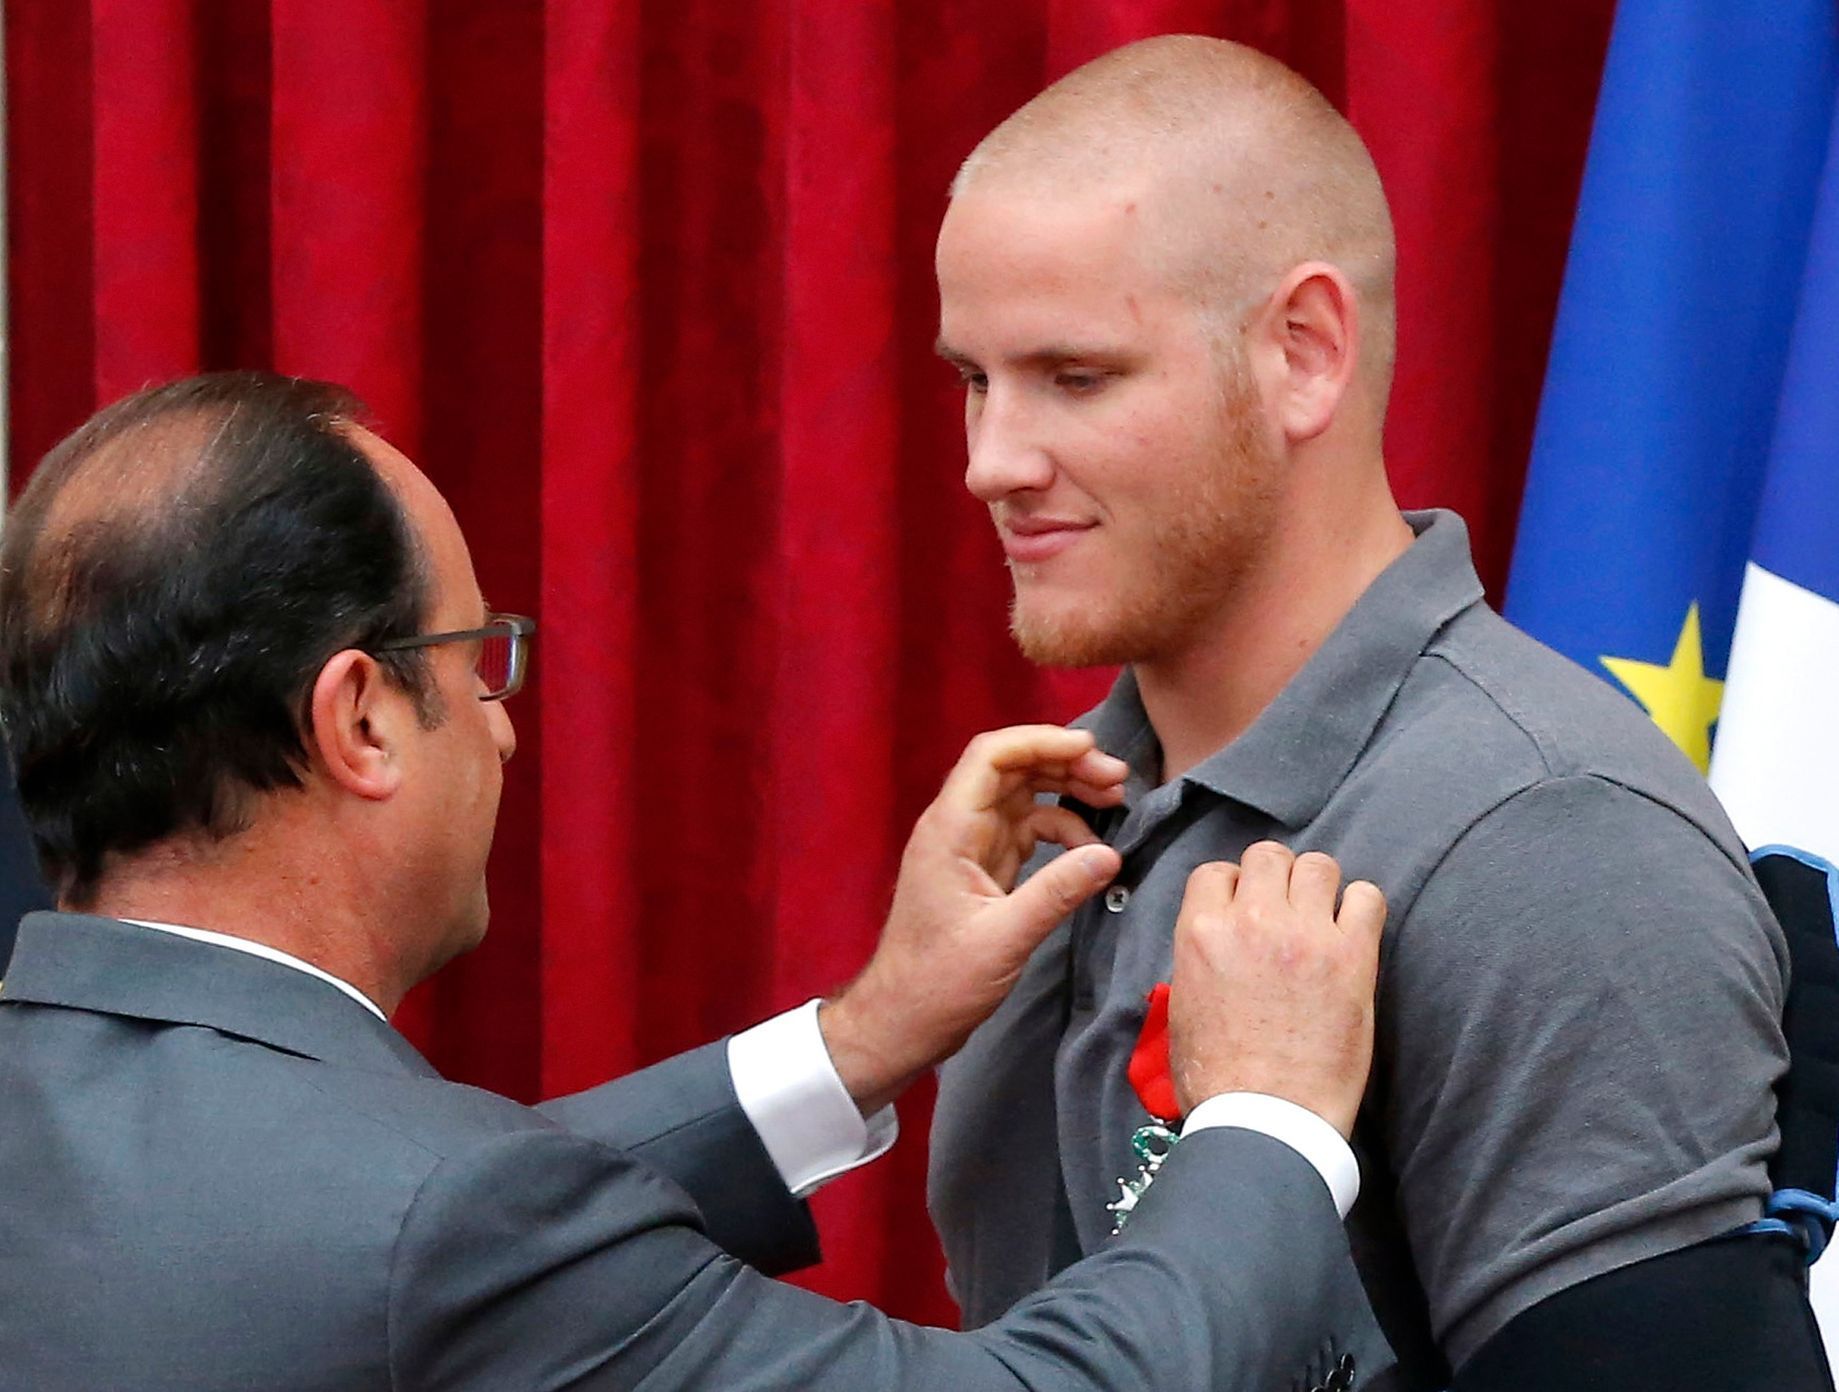 French President Francois Hollande awards US Airman First Class Spencer Stone with the Legion d'Honneur medal as US National Guardsman Alek Skarlatos applauds during a ceremony at the Elysee Palace in